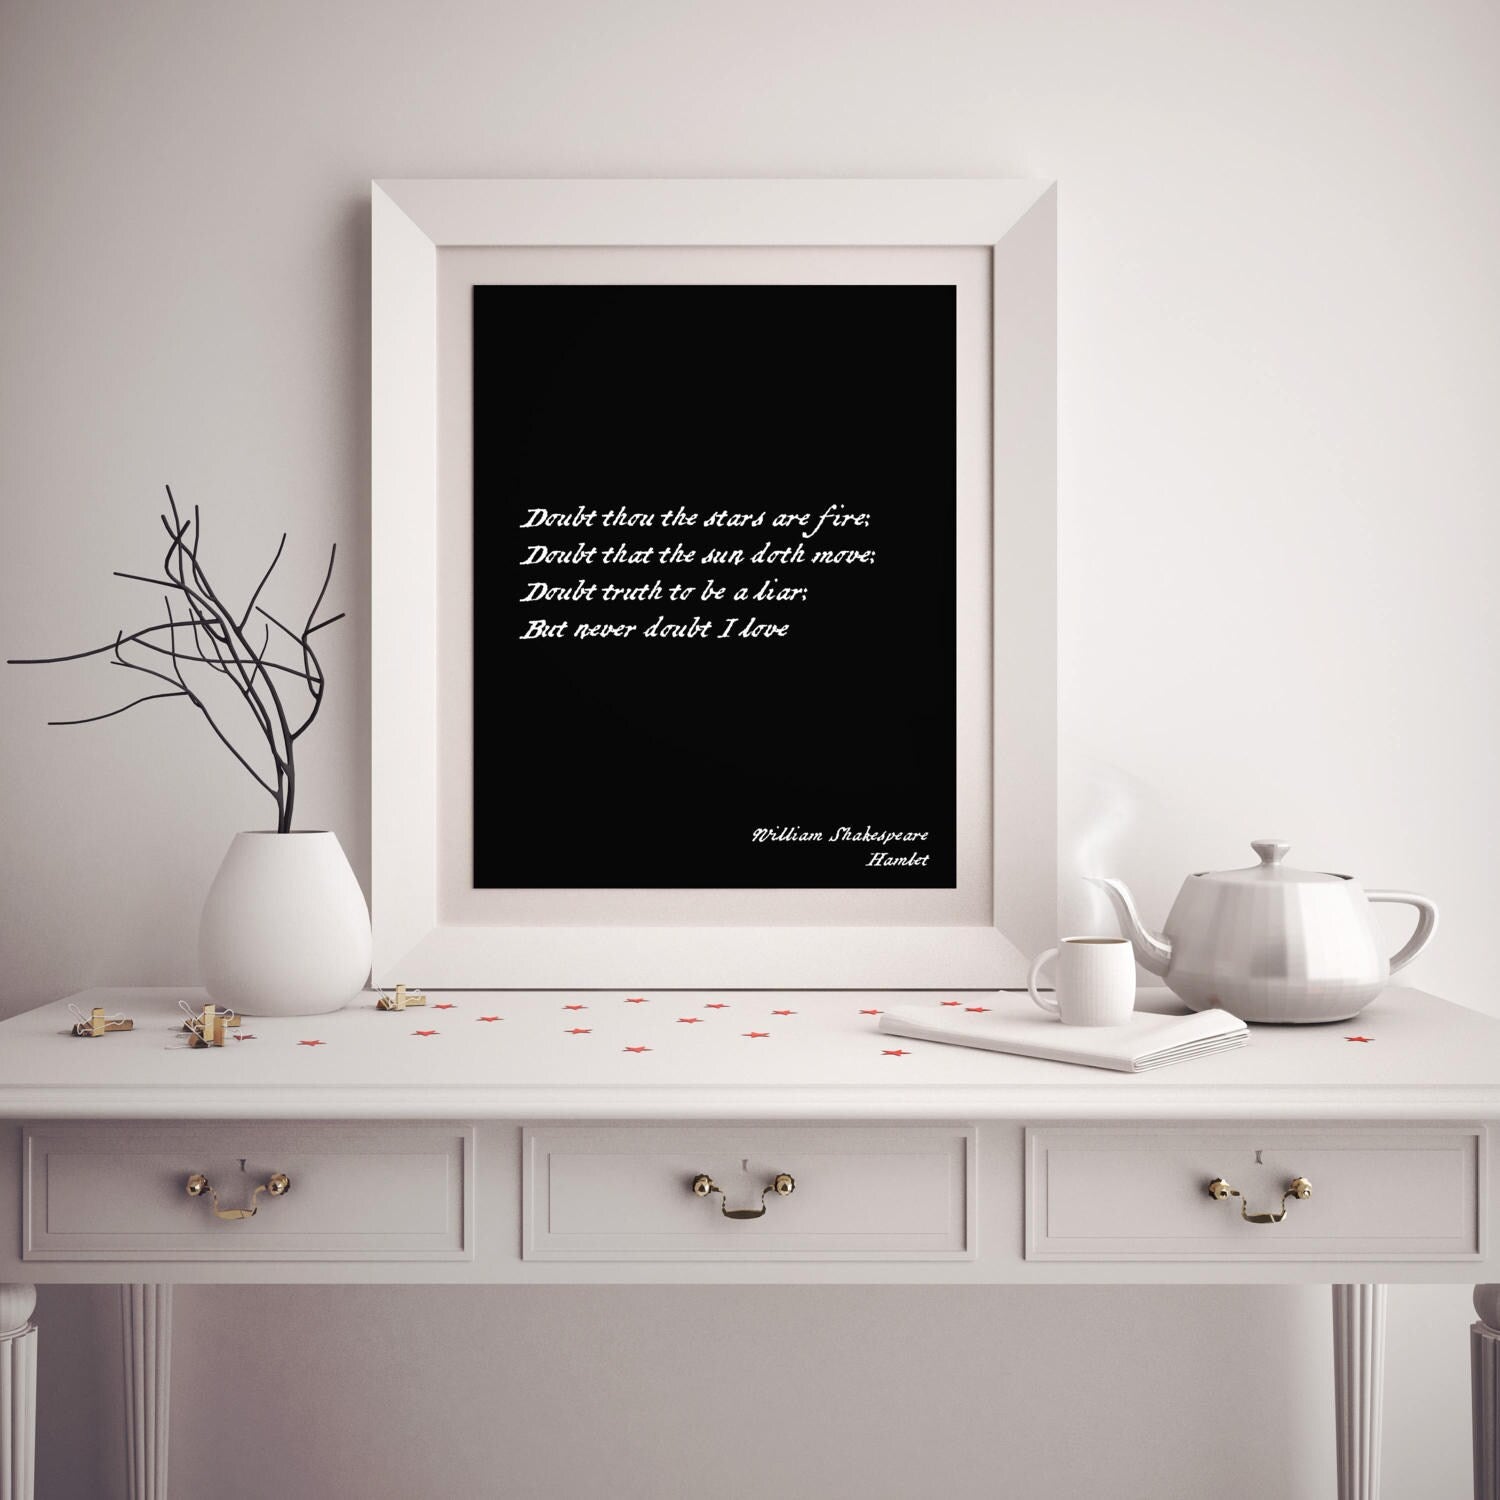 Never Doubt I Love William Shakespeare Quote from Hamlet, Wall Art Prints in Black & White